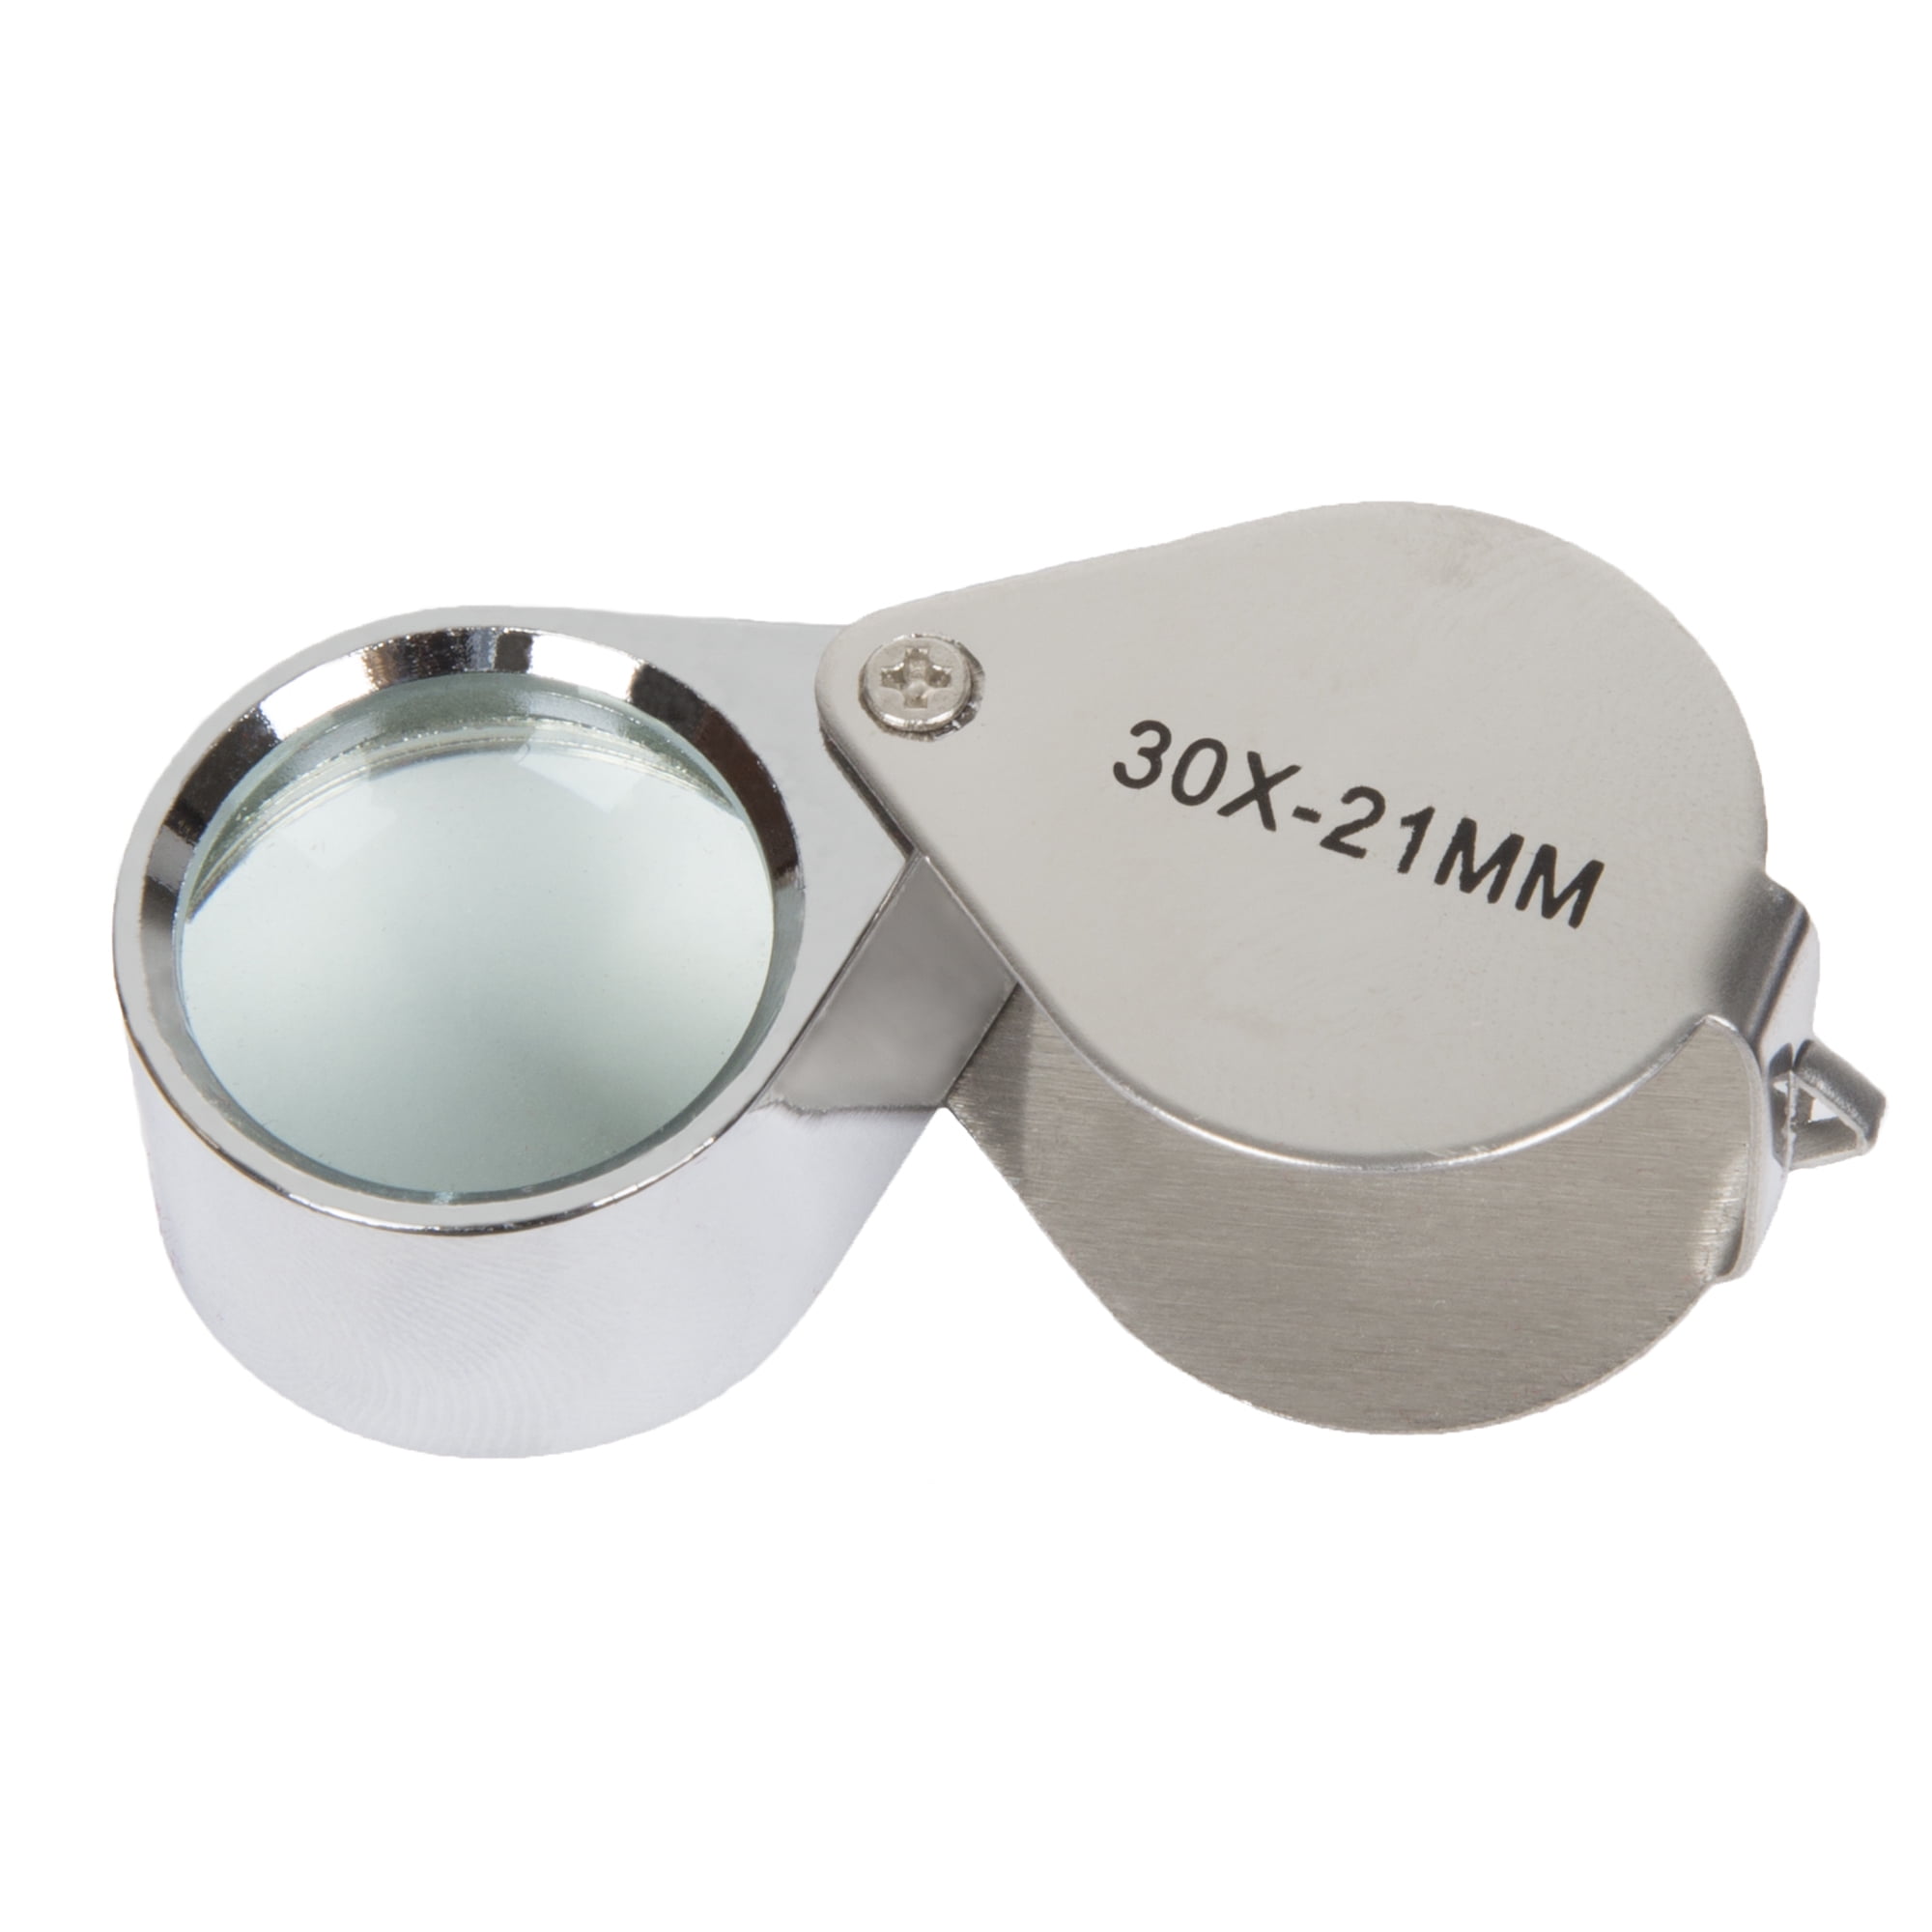 Professional Jewelry Eye Loupe Magnifier For Watches And Antique Compass  Pocket Watch Boxes From Heleniris, $13.89